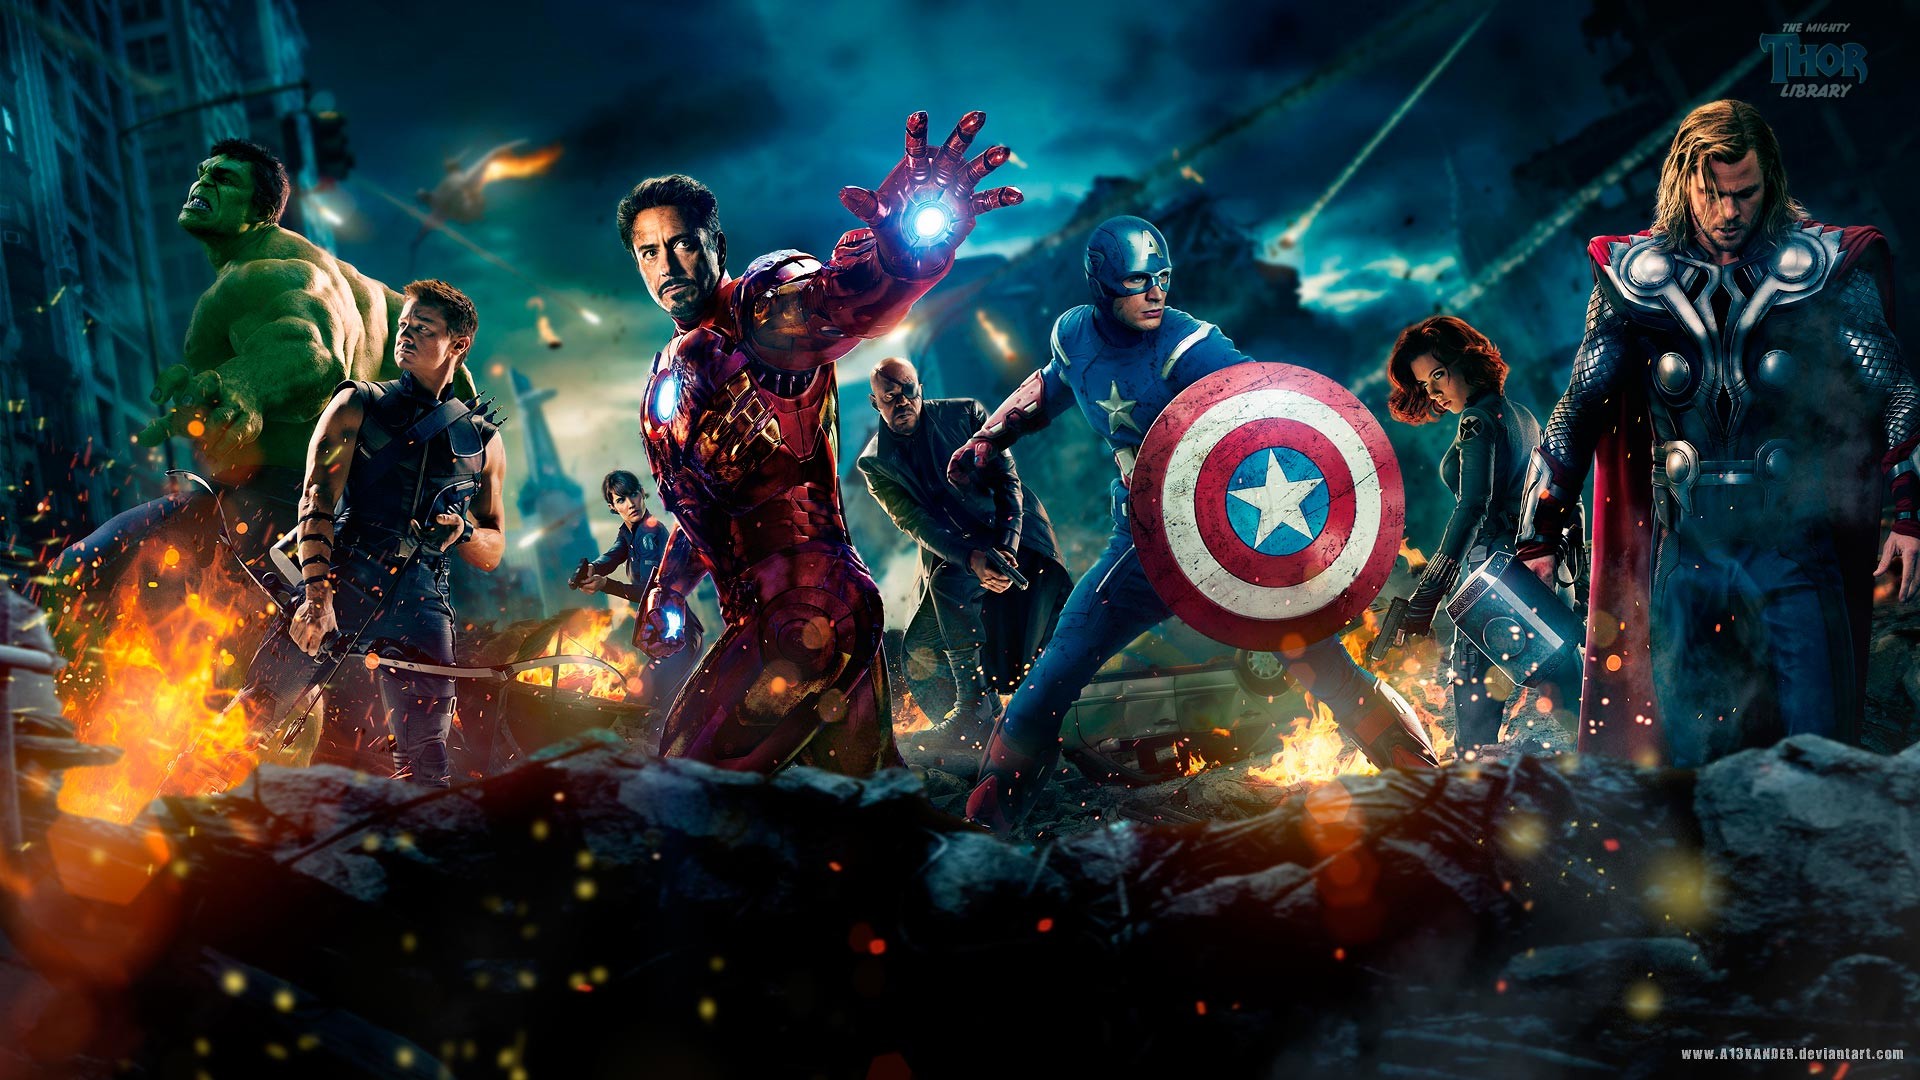 Full Avengers Line Up and SHIELD Poster from the Movie 1920 x 1080